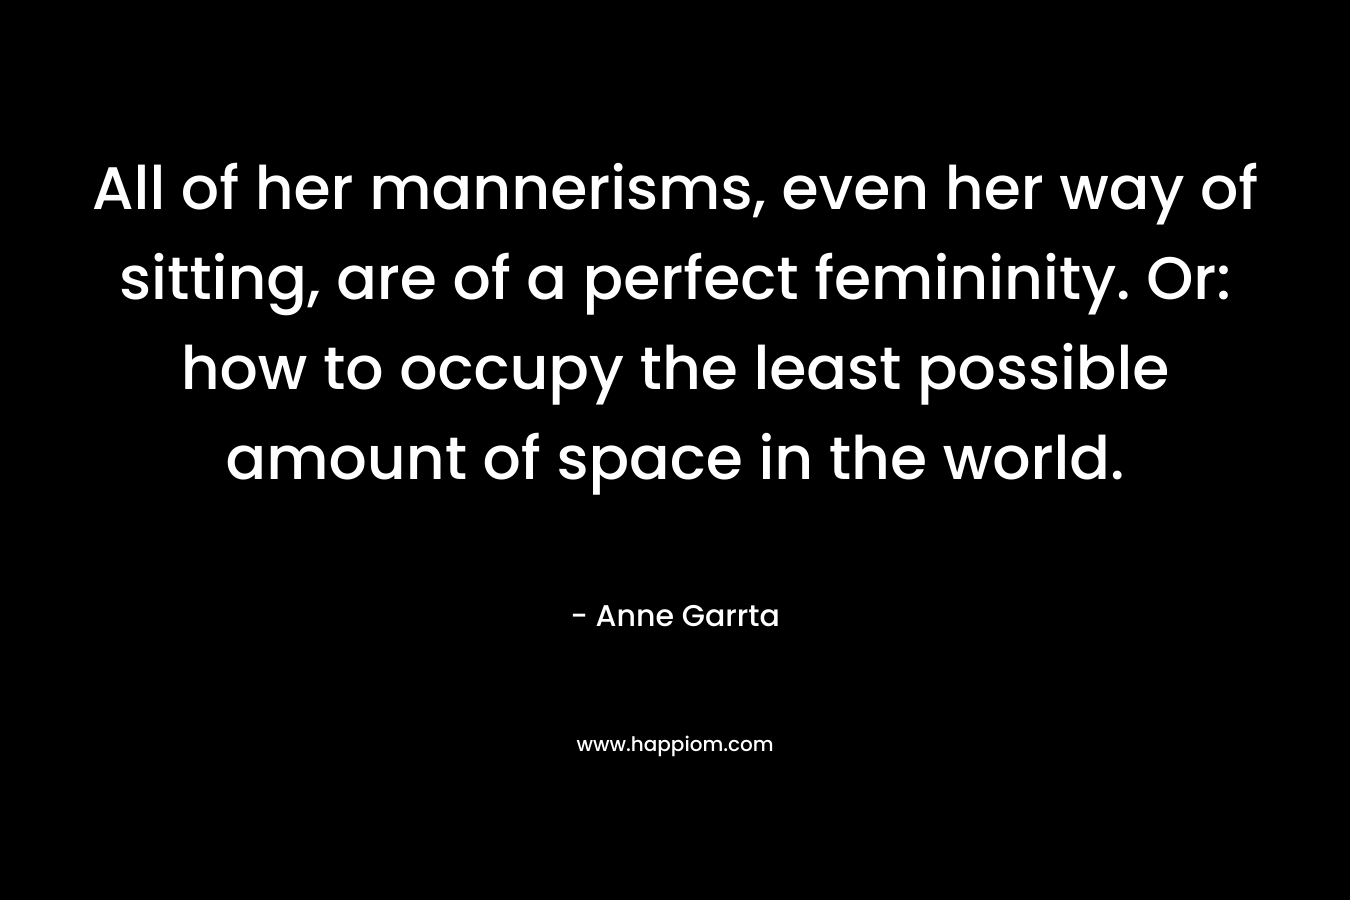 All of her mannerisms, even her way of sitting, are of a perfect femininity. Or: how to occupy the least possible amount of space in the world. – Anne Garrta